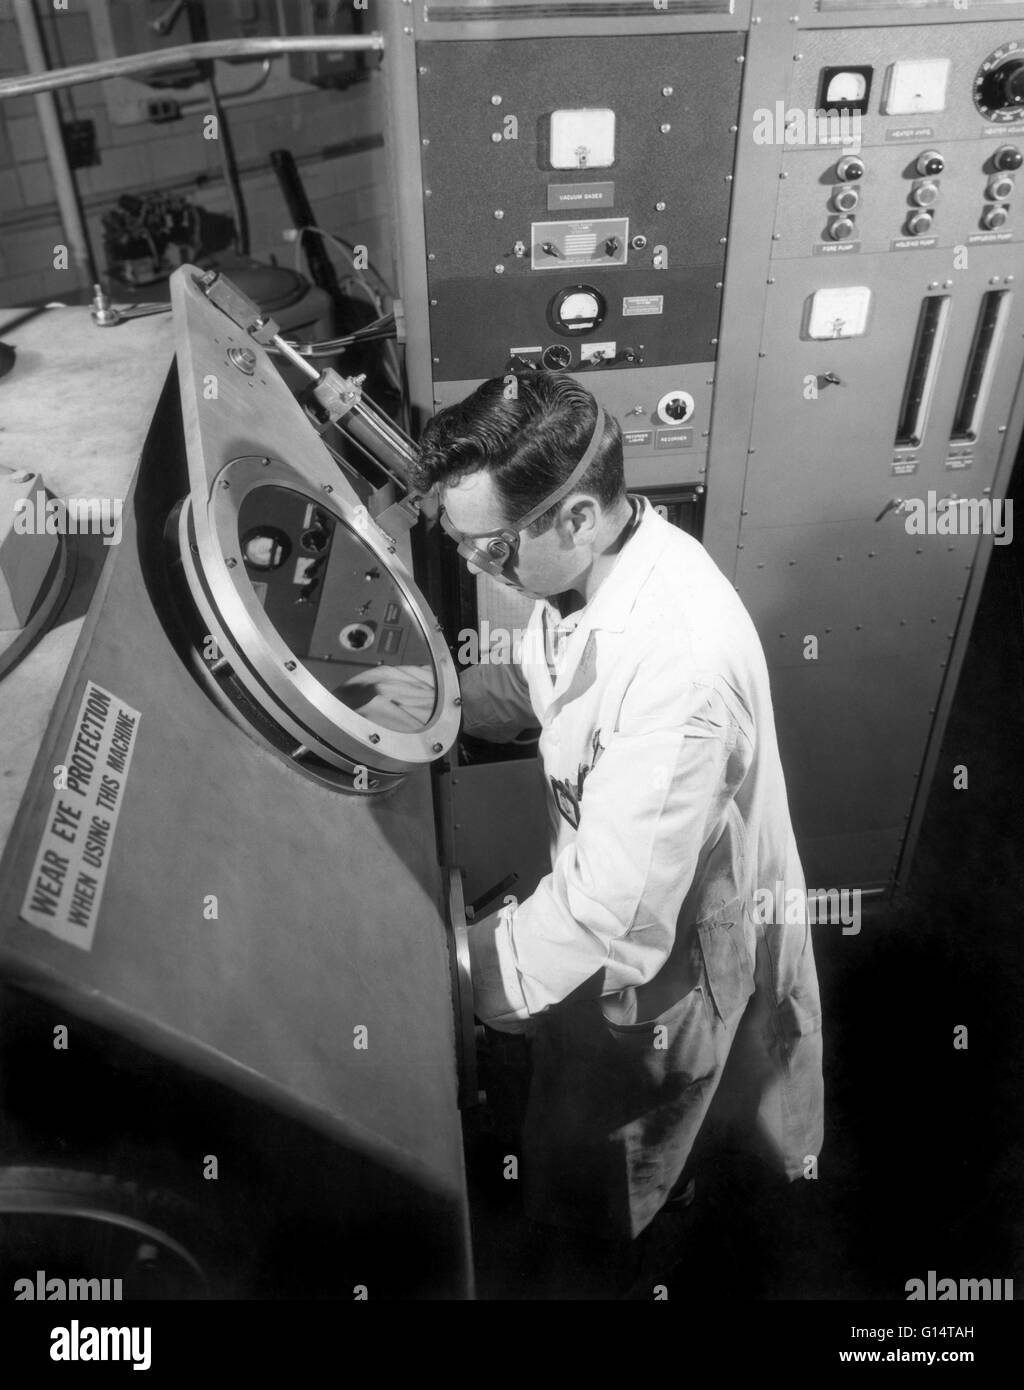 Peering through the port of a vacuum welding box, a technician for Westinghouse Electric Corporation's atomic power department guides equipment that is capping the end of an alloy tube which will contain atomic fuel for a power reactor. The tube, made of Stock Photo